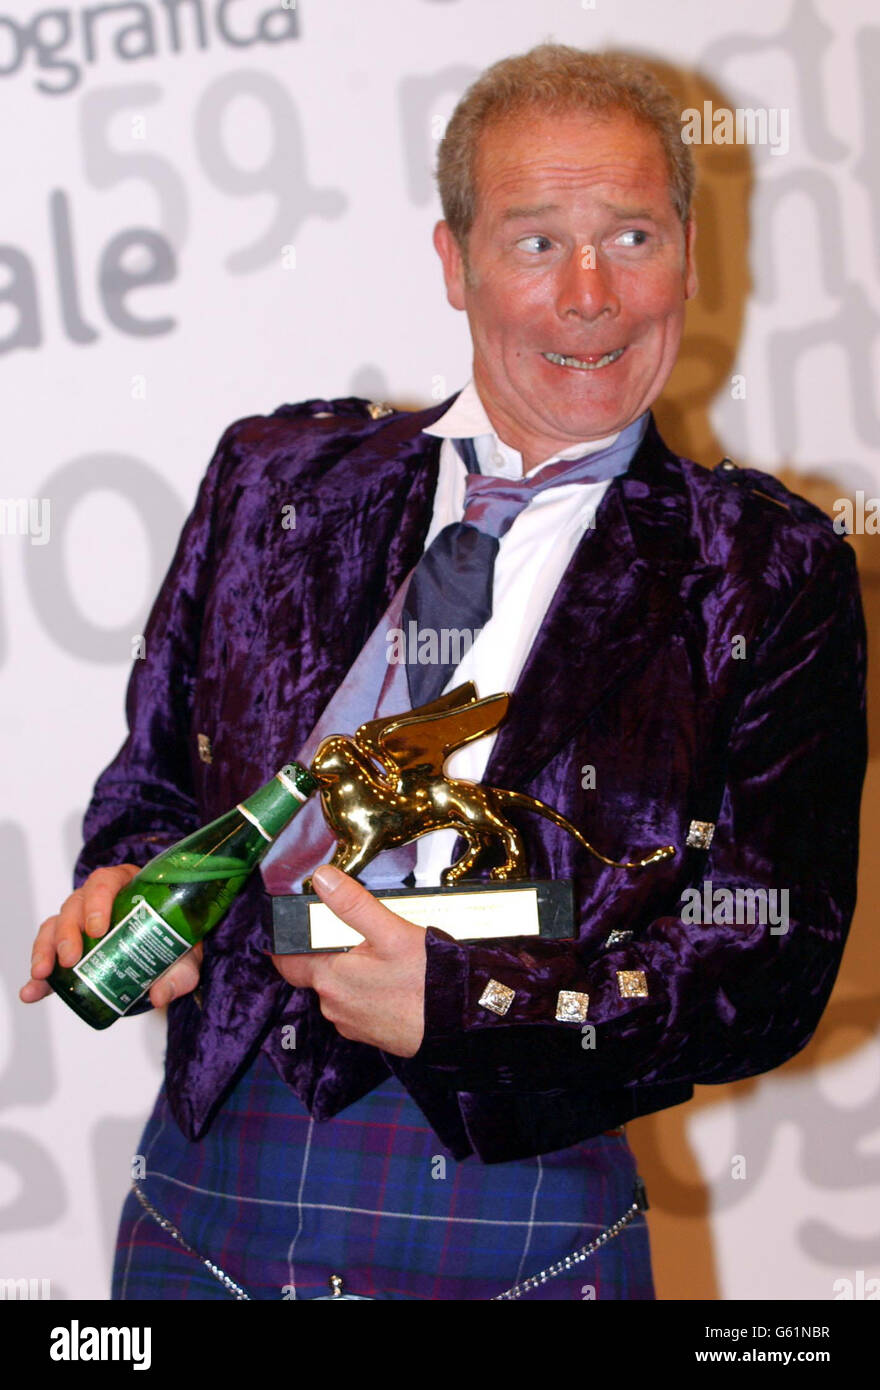 Scottish director Peter Mullan holds the Golden Lion award during the closing ceremony of the 59th Venice film festival, Venice, Lido, Italy. Mullan won the Golden Lion award for his film 'The Magdalene Sisters'. Stock Photo